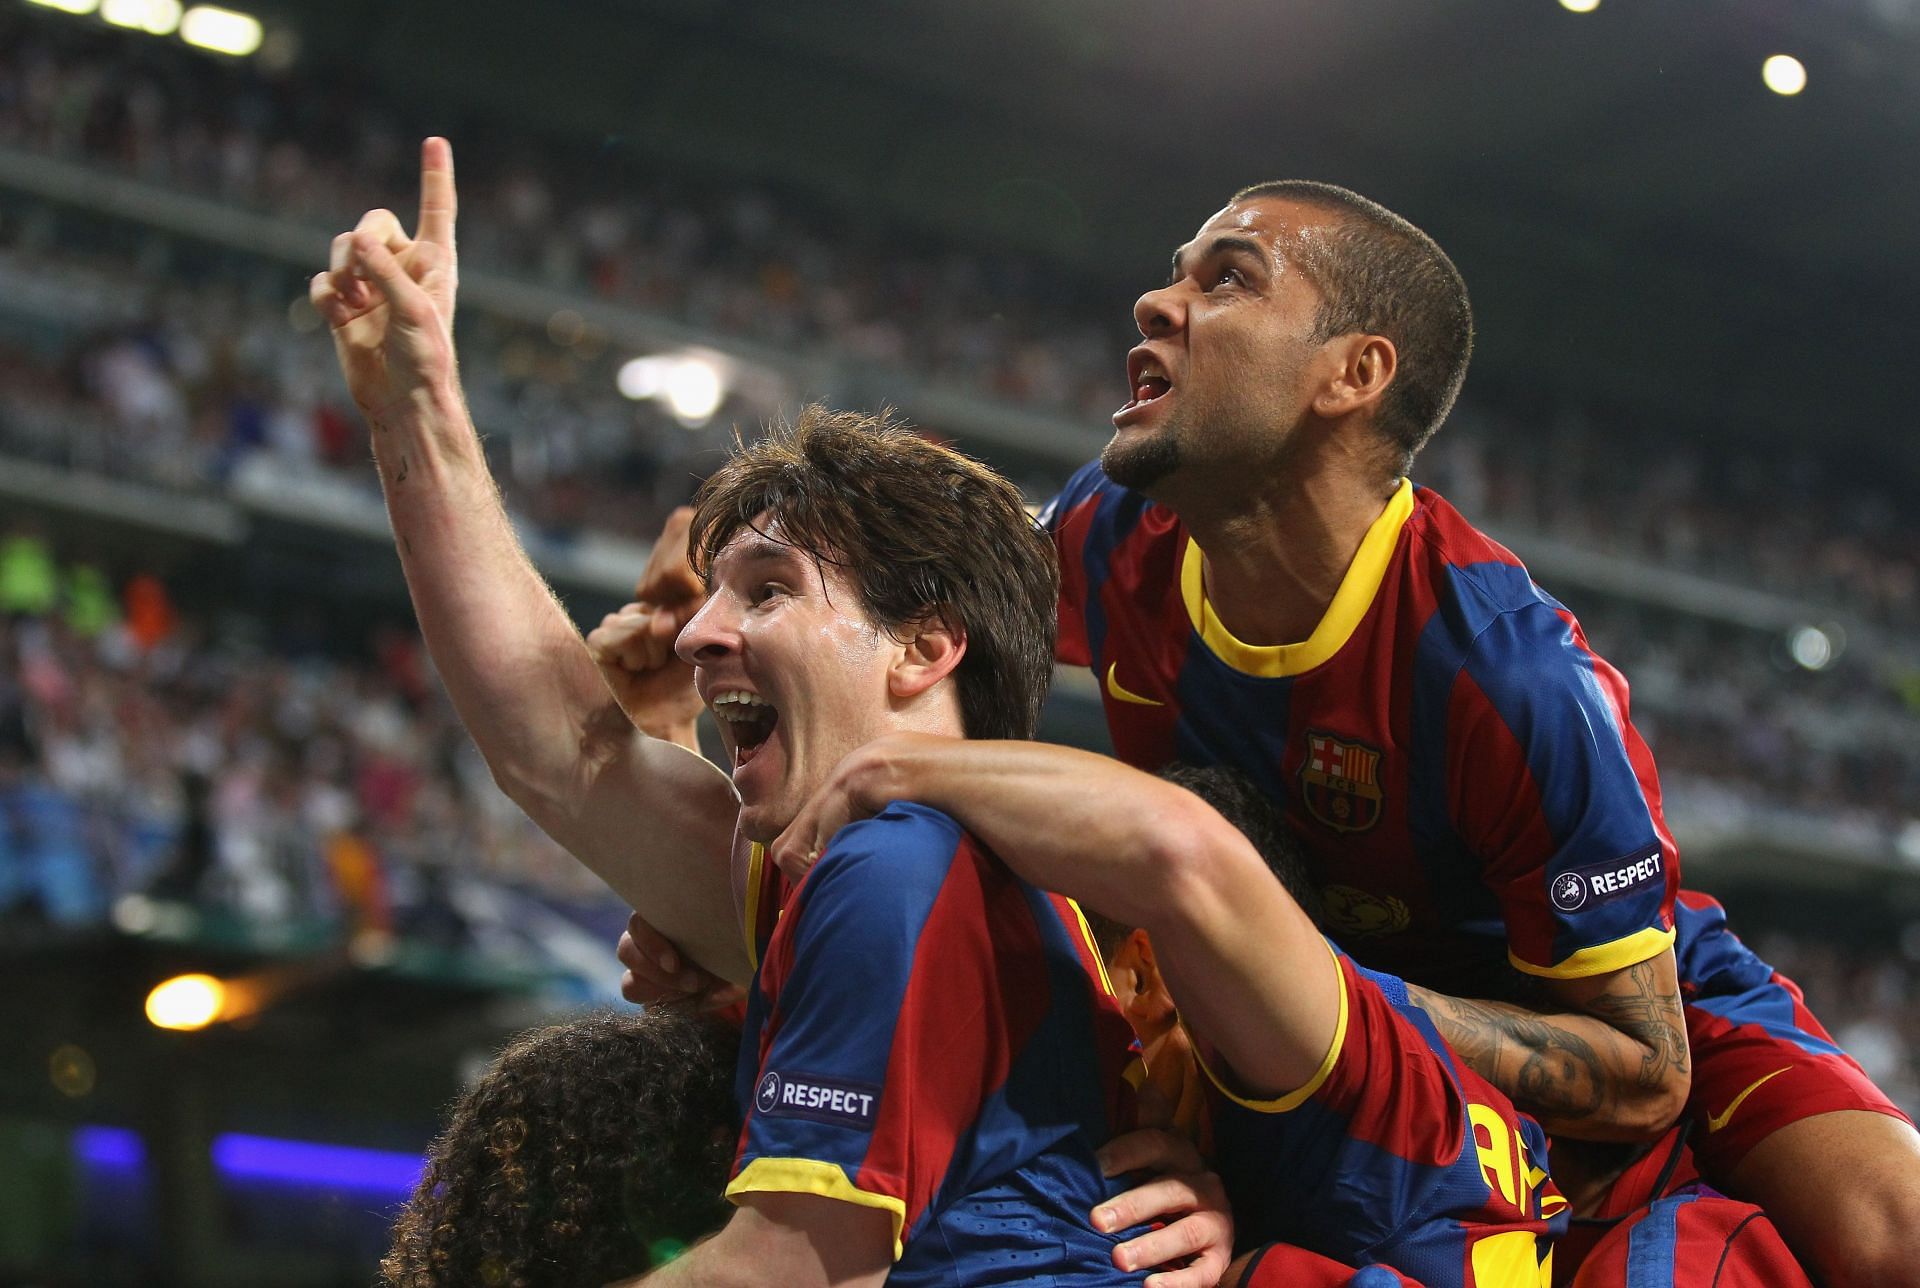 Barcelona claimed their 10th Supercopa de Espana title thanks to Lionel Messi